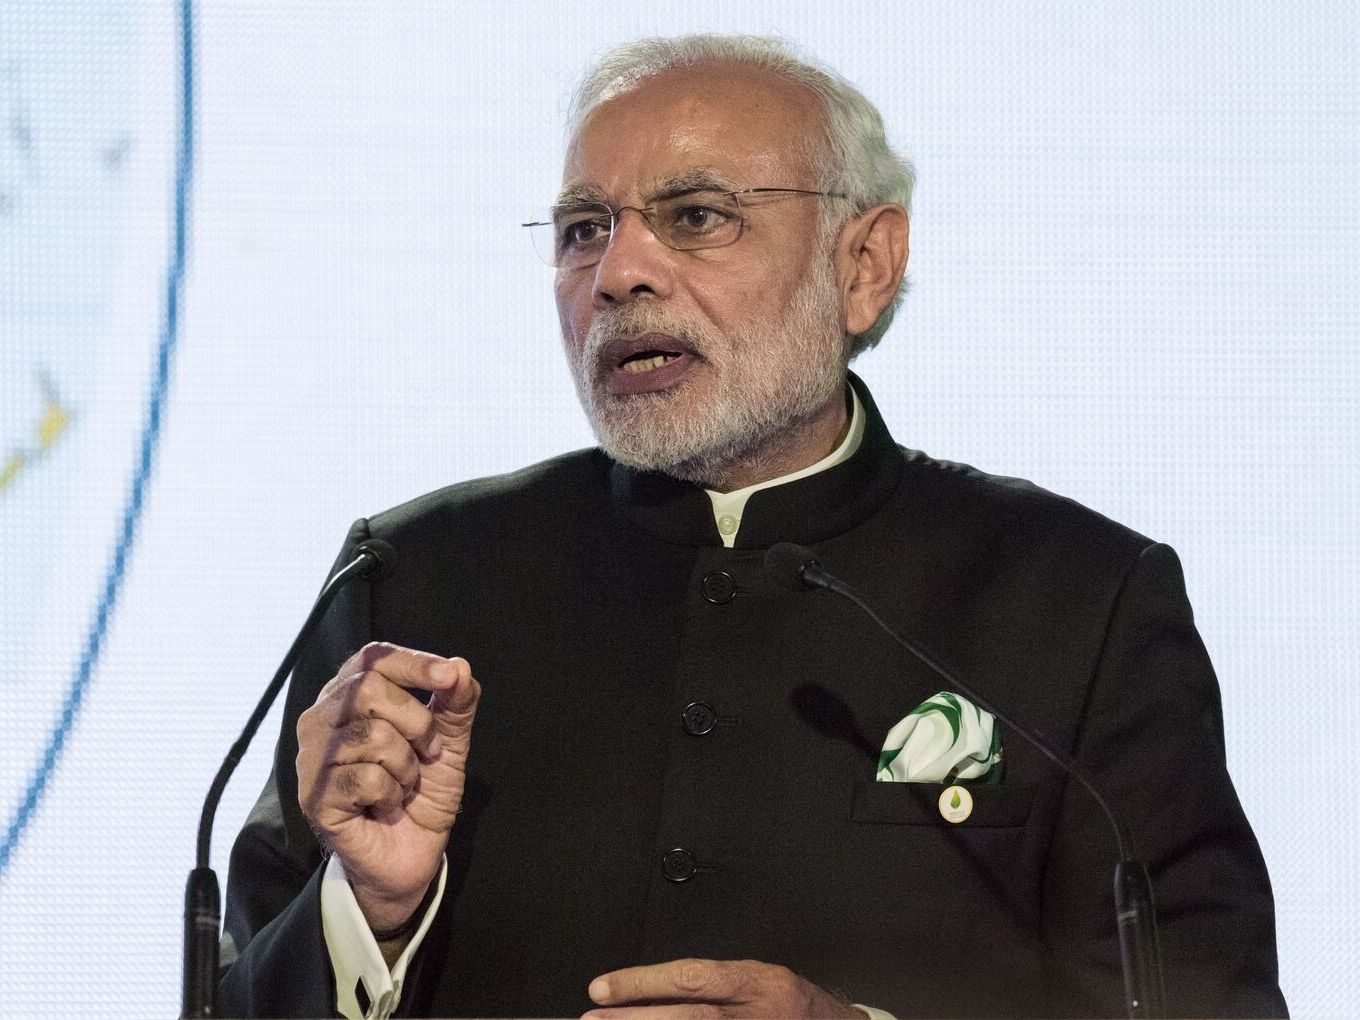 ‘Howdy, Modi’ Houston : Data Is The New Form Of Wealth, Says PM